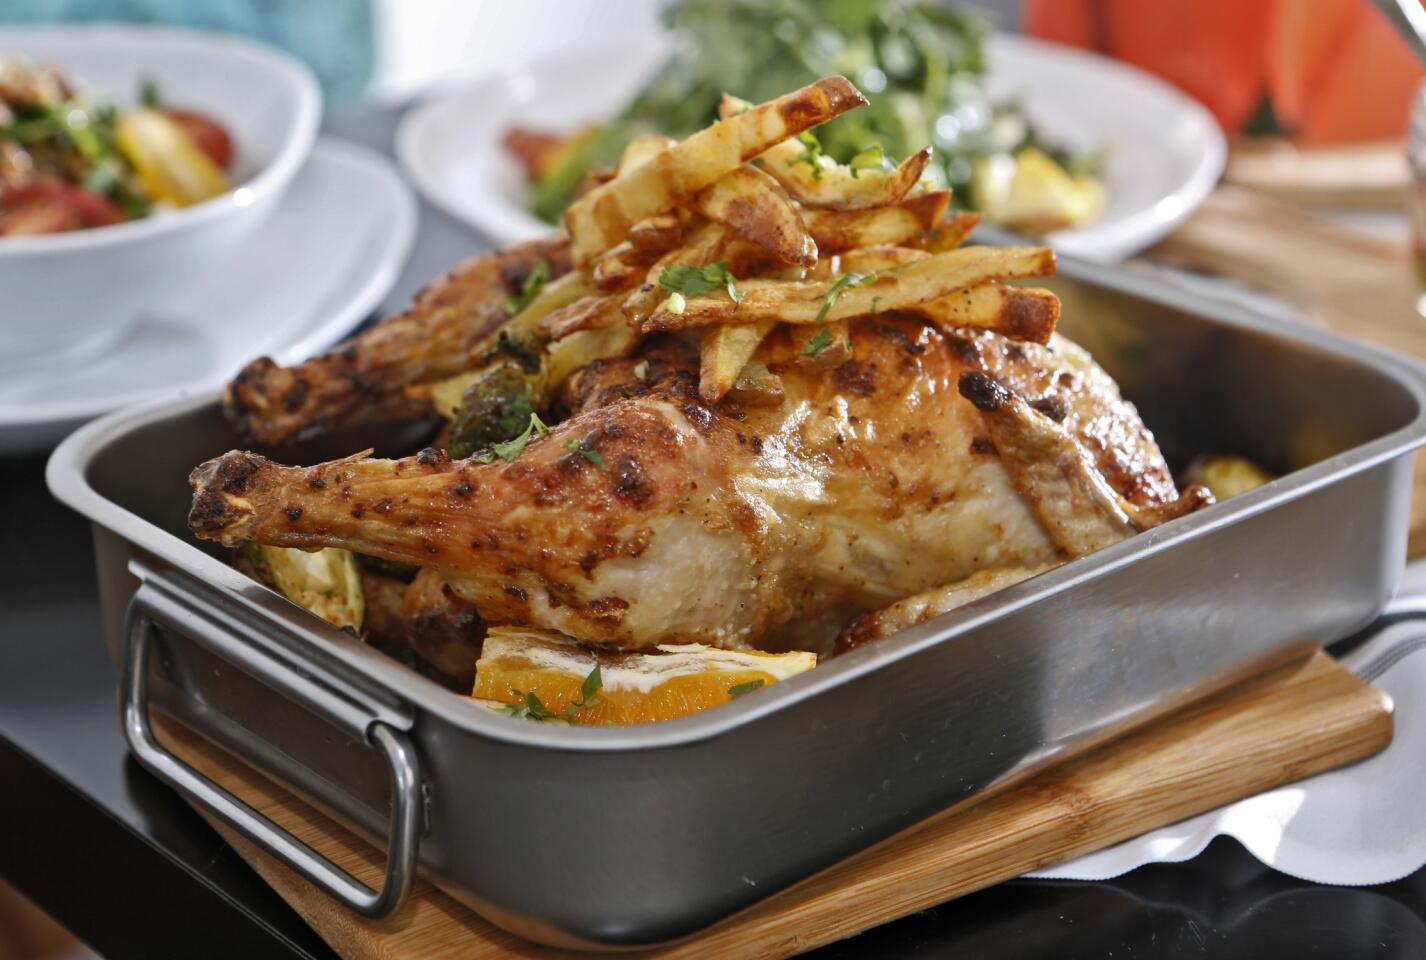 Heritage Eatery's oven-baked chicken with french fries.